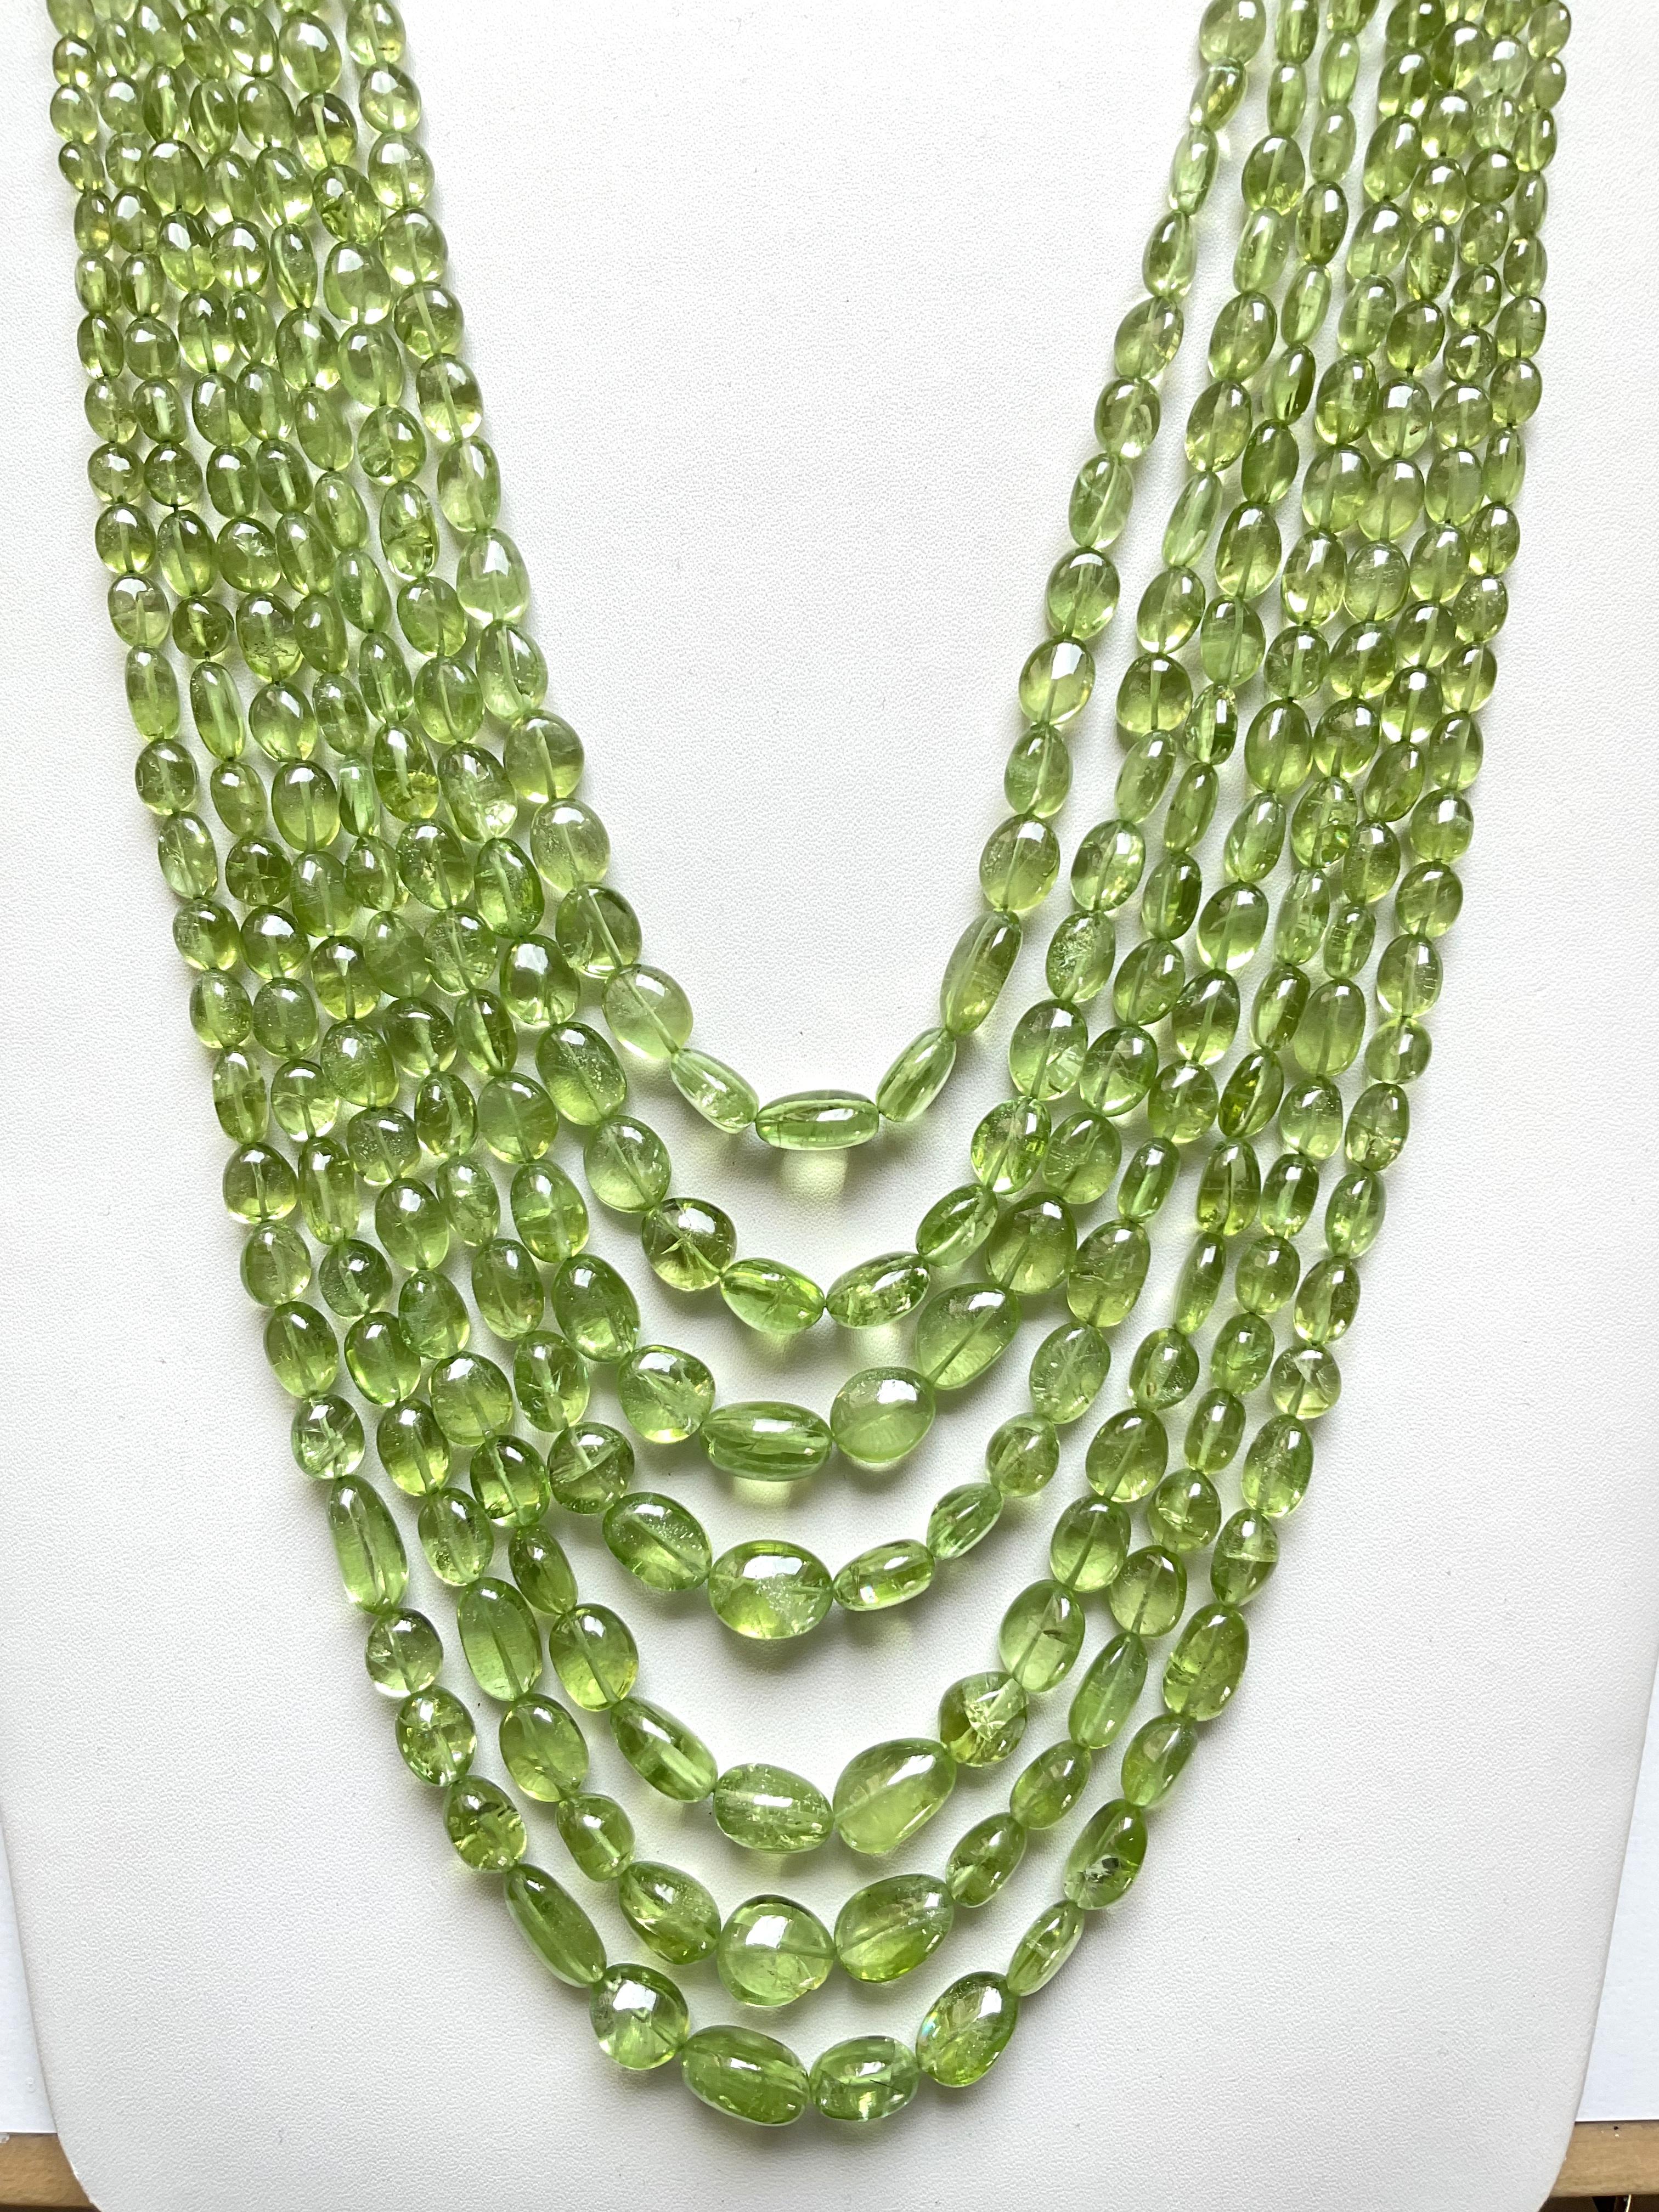 Tumbled 1055.55 carat apple green peridot top quality plain tumbled natural necklace gem For Sale